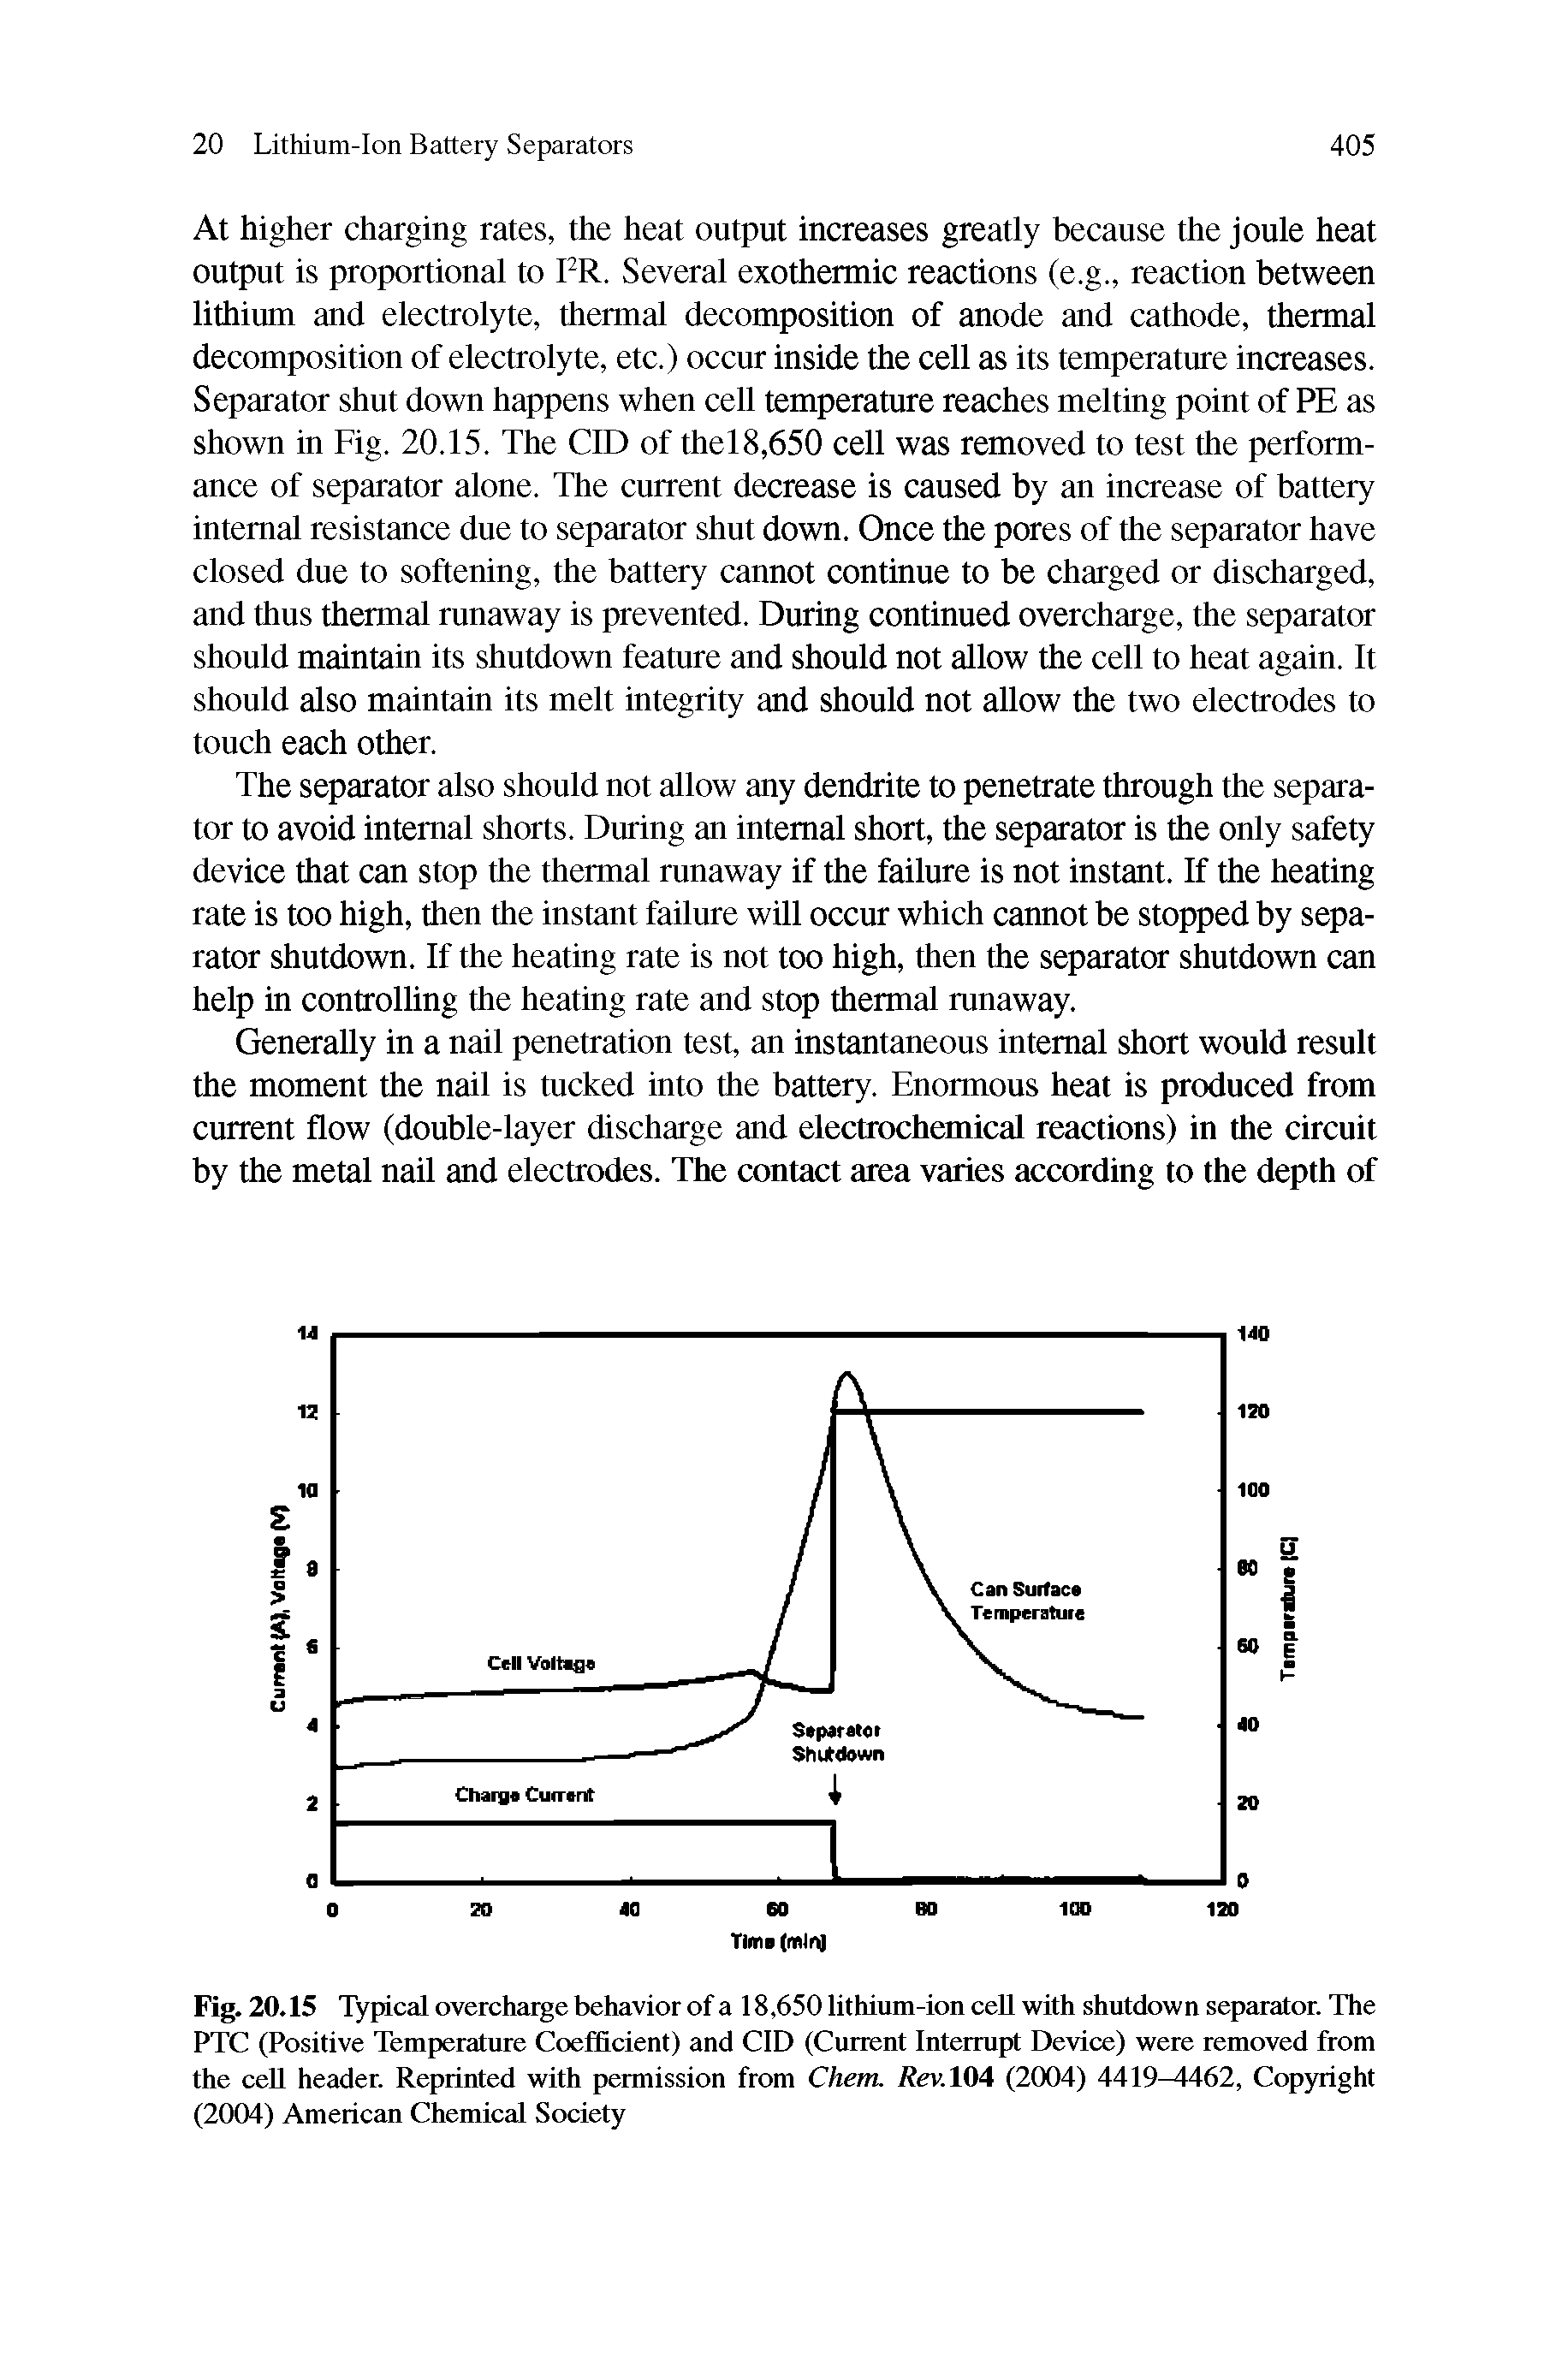 Fig. 20.15 Typical overcharge behavior of a 18,650 lithium-ion ceU with shutdown separator. The PTC (Positive Temperature Coefficient) and CID (Current Interrupt Device) were removed from the ceU header. Reprinted with permission from Chem. Rev. 104 (2004) 4419-4462, Copyright (2004) American Chemical Society...